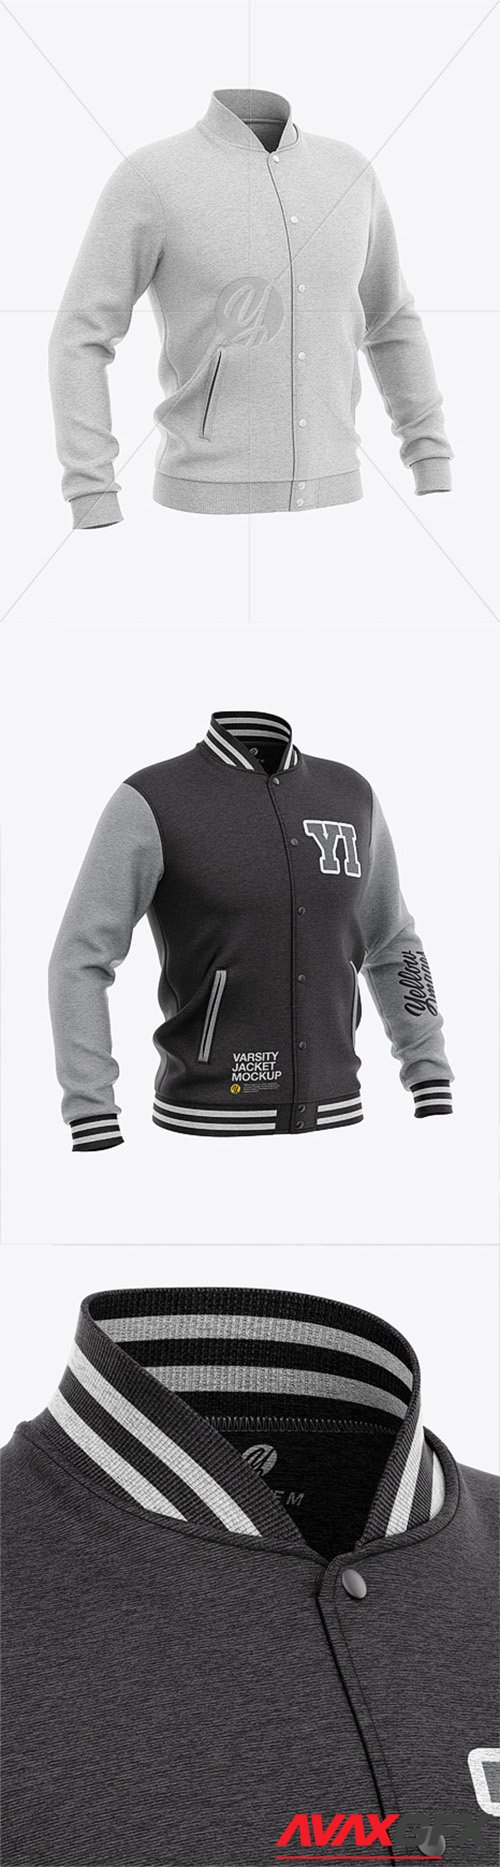 Download Men S Varsity Jacket Mockup Back Half Side View 60113 Avaxgfx All Downloads That You Need In One Place Graphic From Nitroflare Rapidgator